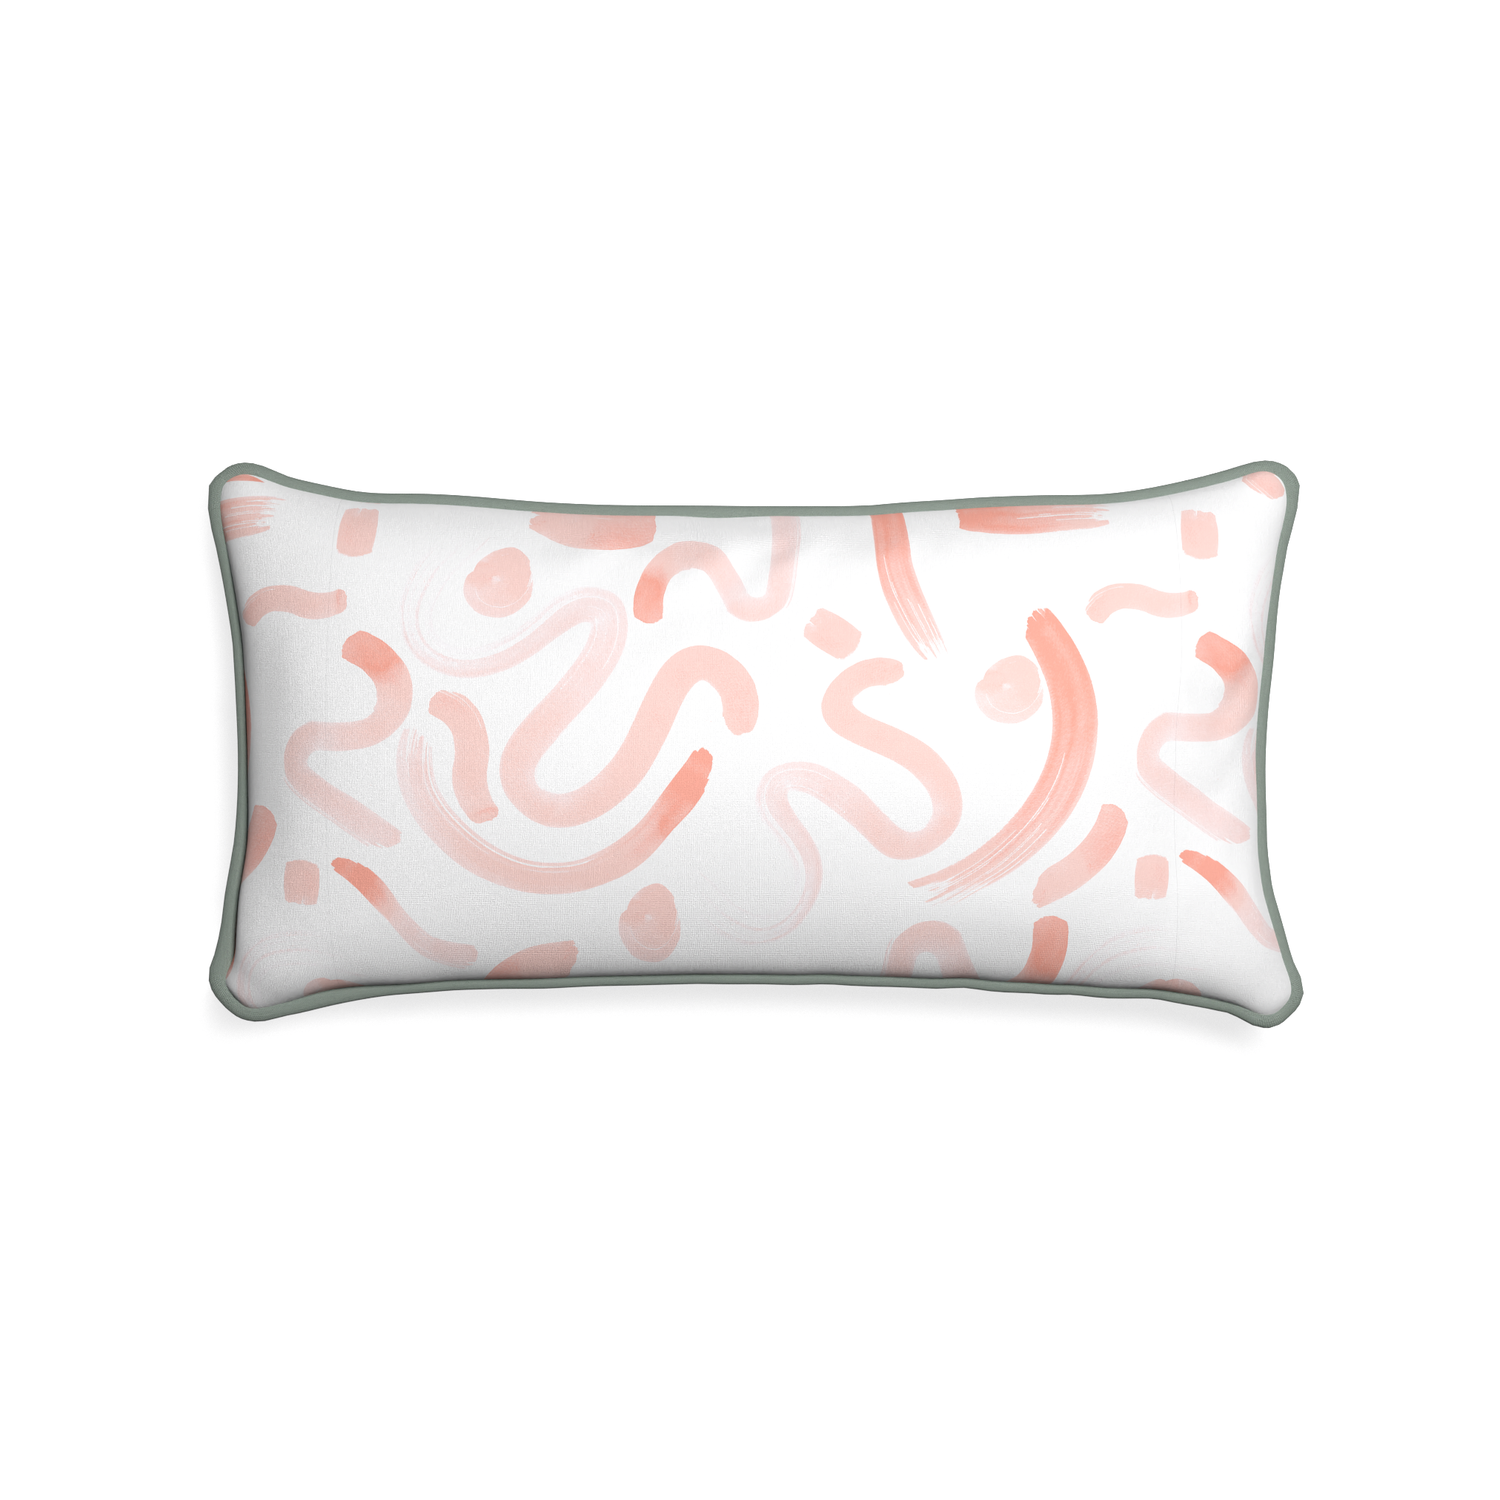 Midi-lumbar hockney pink custom pink graphicpillow with sage piping on white background